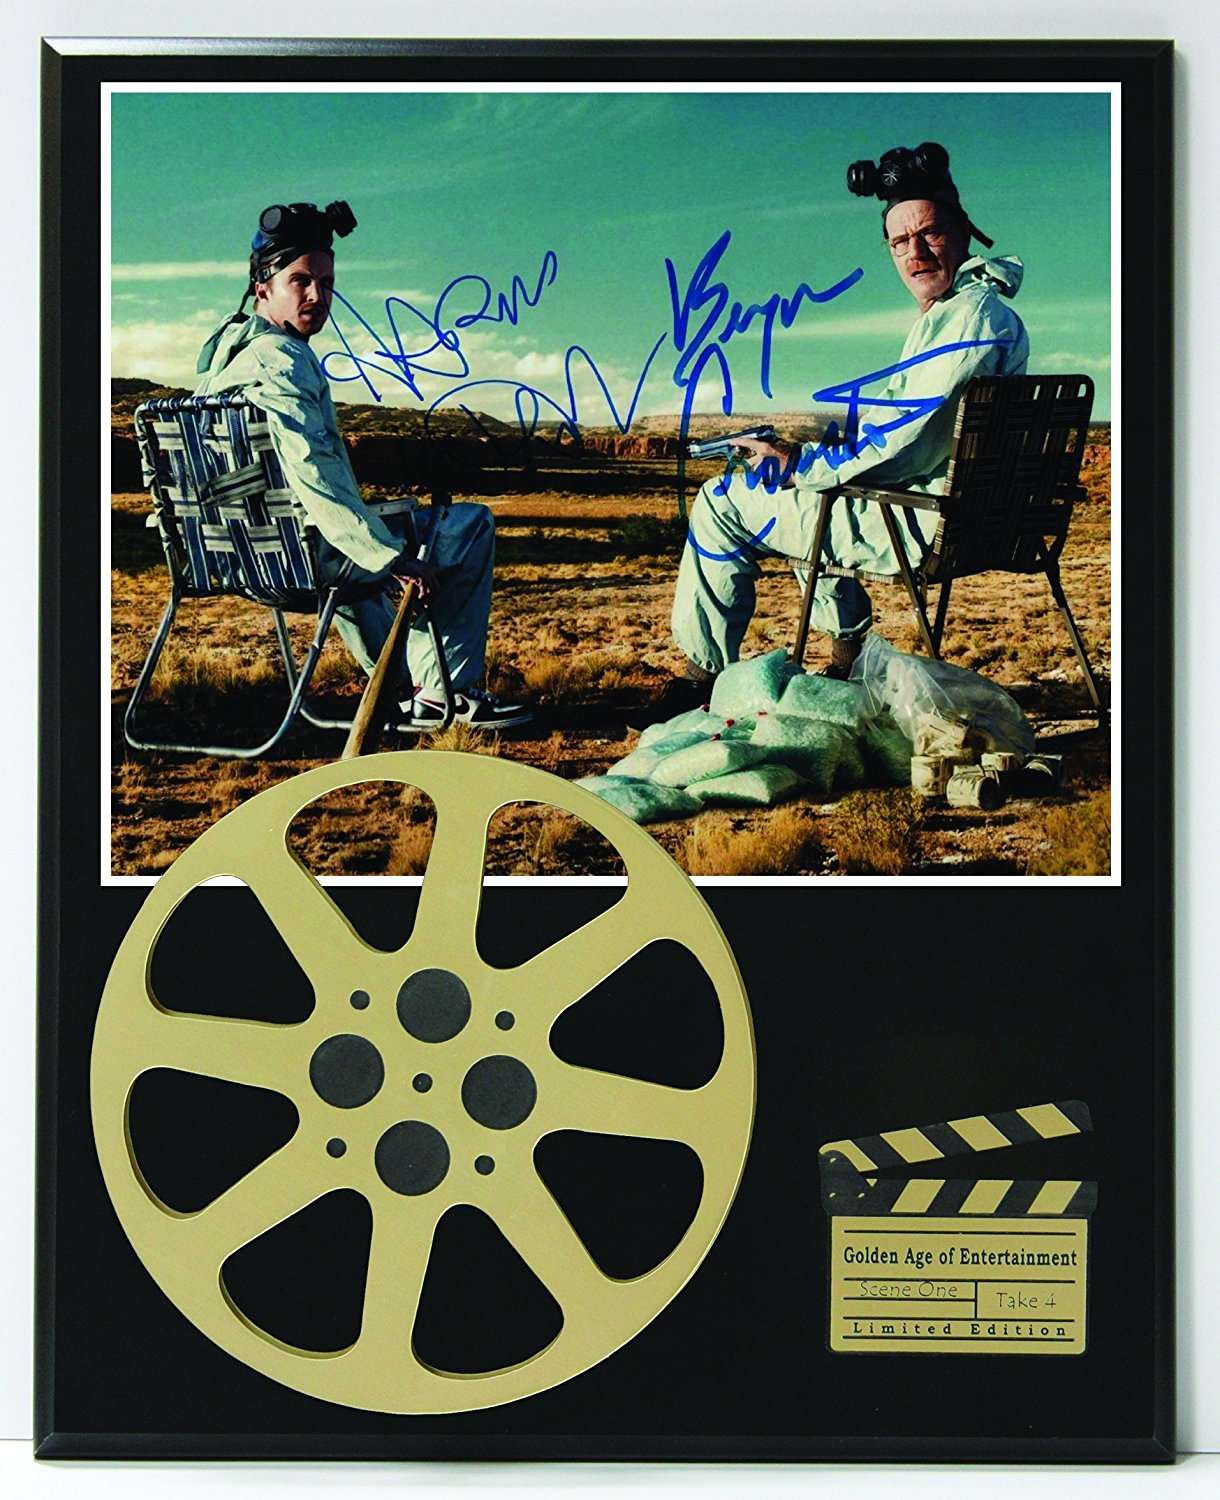 https://goldrecordoutlet.com/wp-content/uploads/imported/Breaking-Bad-Limited-Edition-Reproduction-Autographed-Movie-Reel-Display-K1-B01M8FTDYQ.jpg